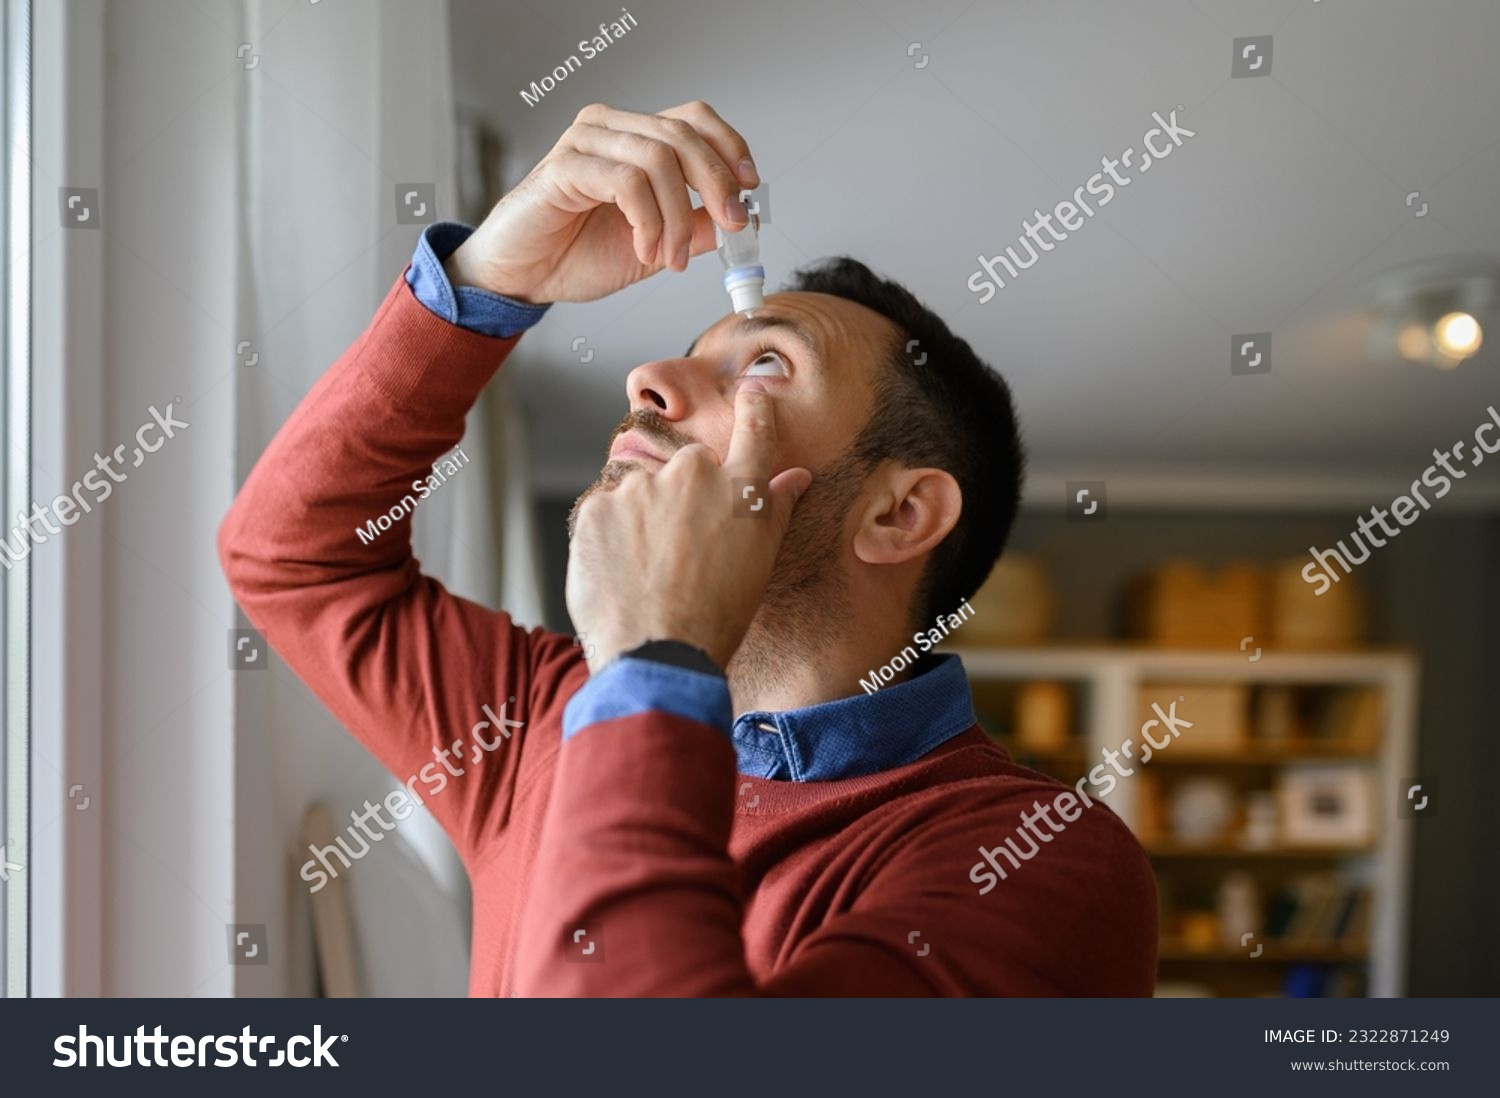 Close-up of young man applying eye drops to treat dry eye and irritation at home #2322871249